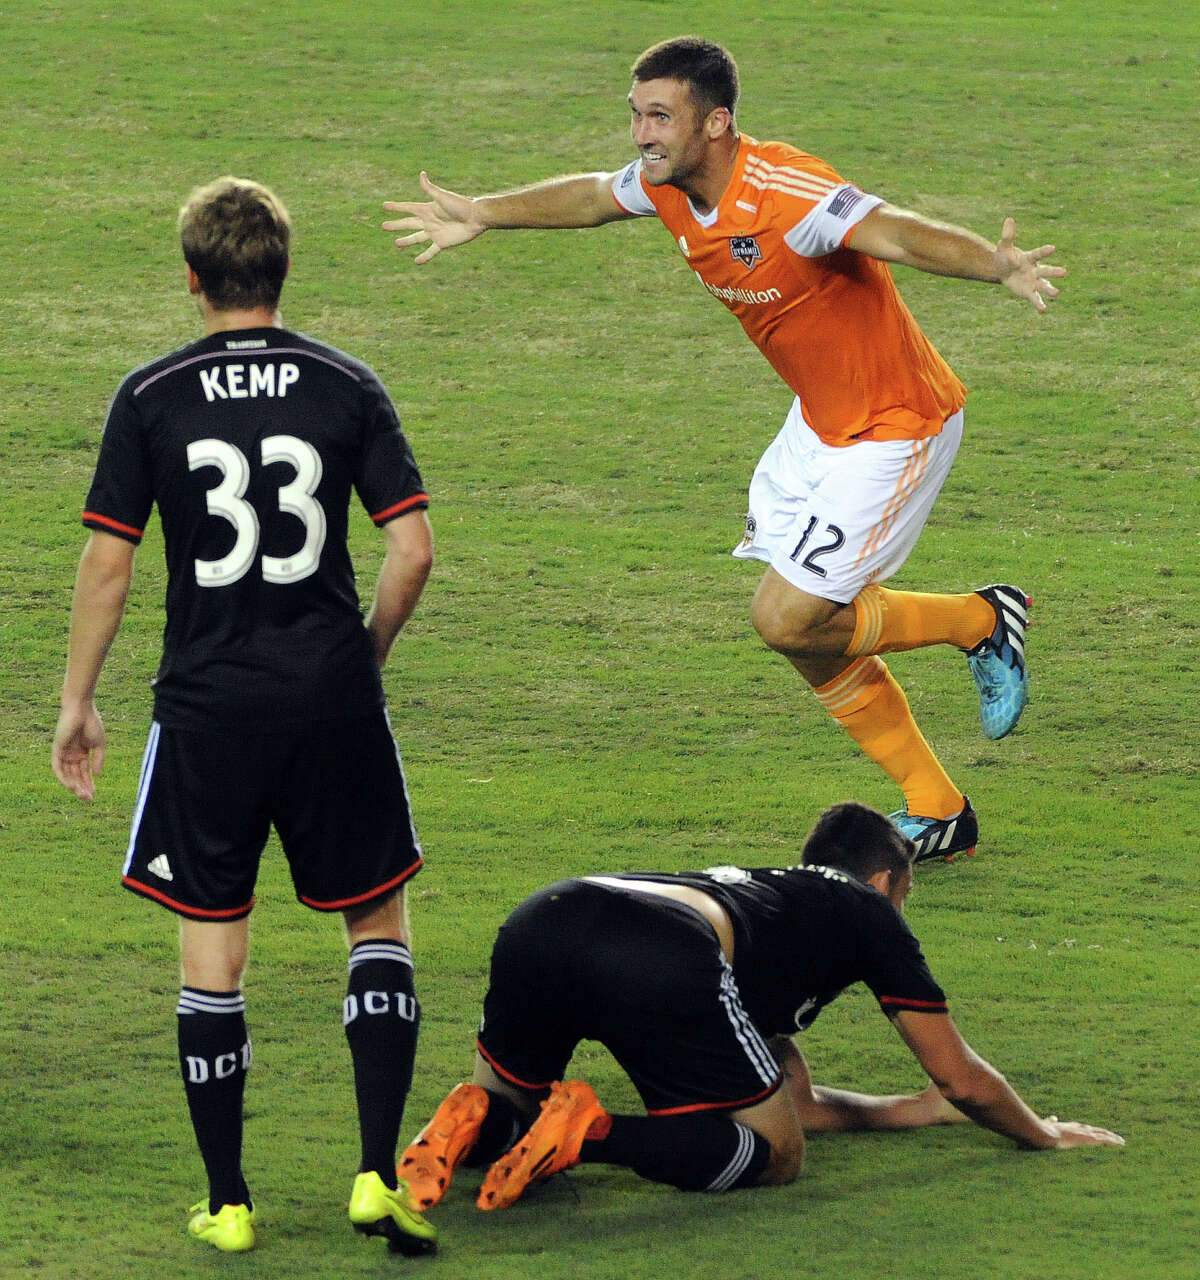 Houston Dynamo forward Will Bruin (12) celebrates his game-winning goal in the 90th minute as D.C. United defender Taylor Kemp (33) looks on during the second half of an MLS soccer game , Sunday, August 3, 2014, at BBVA Compass Stadium in Houston.